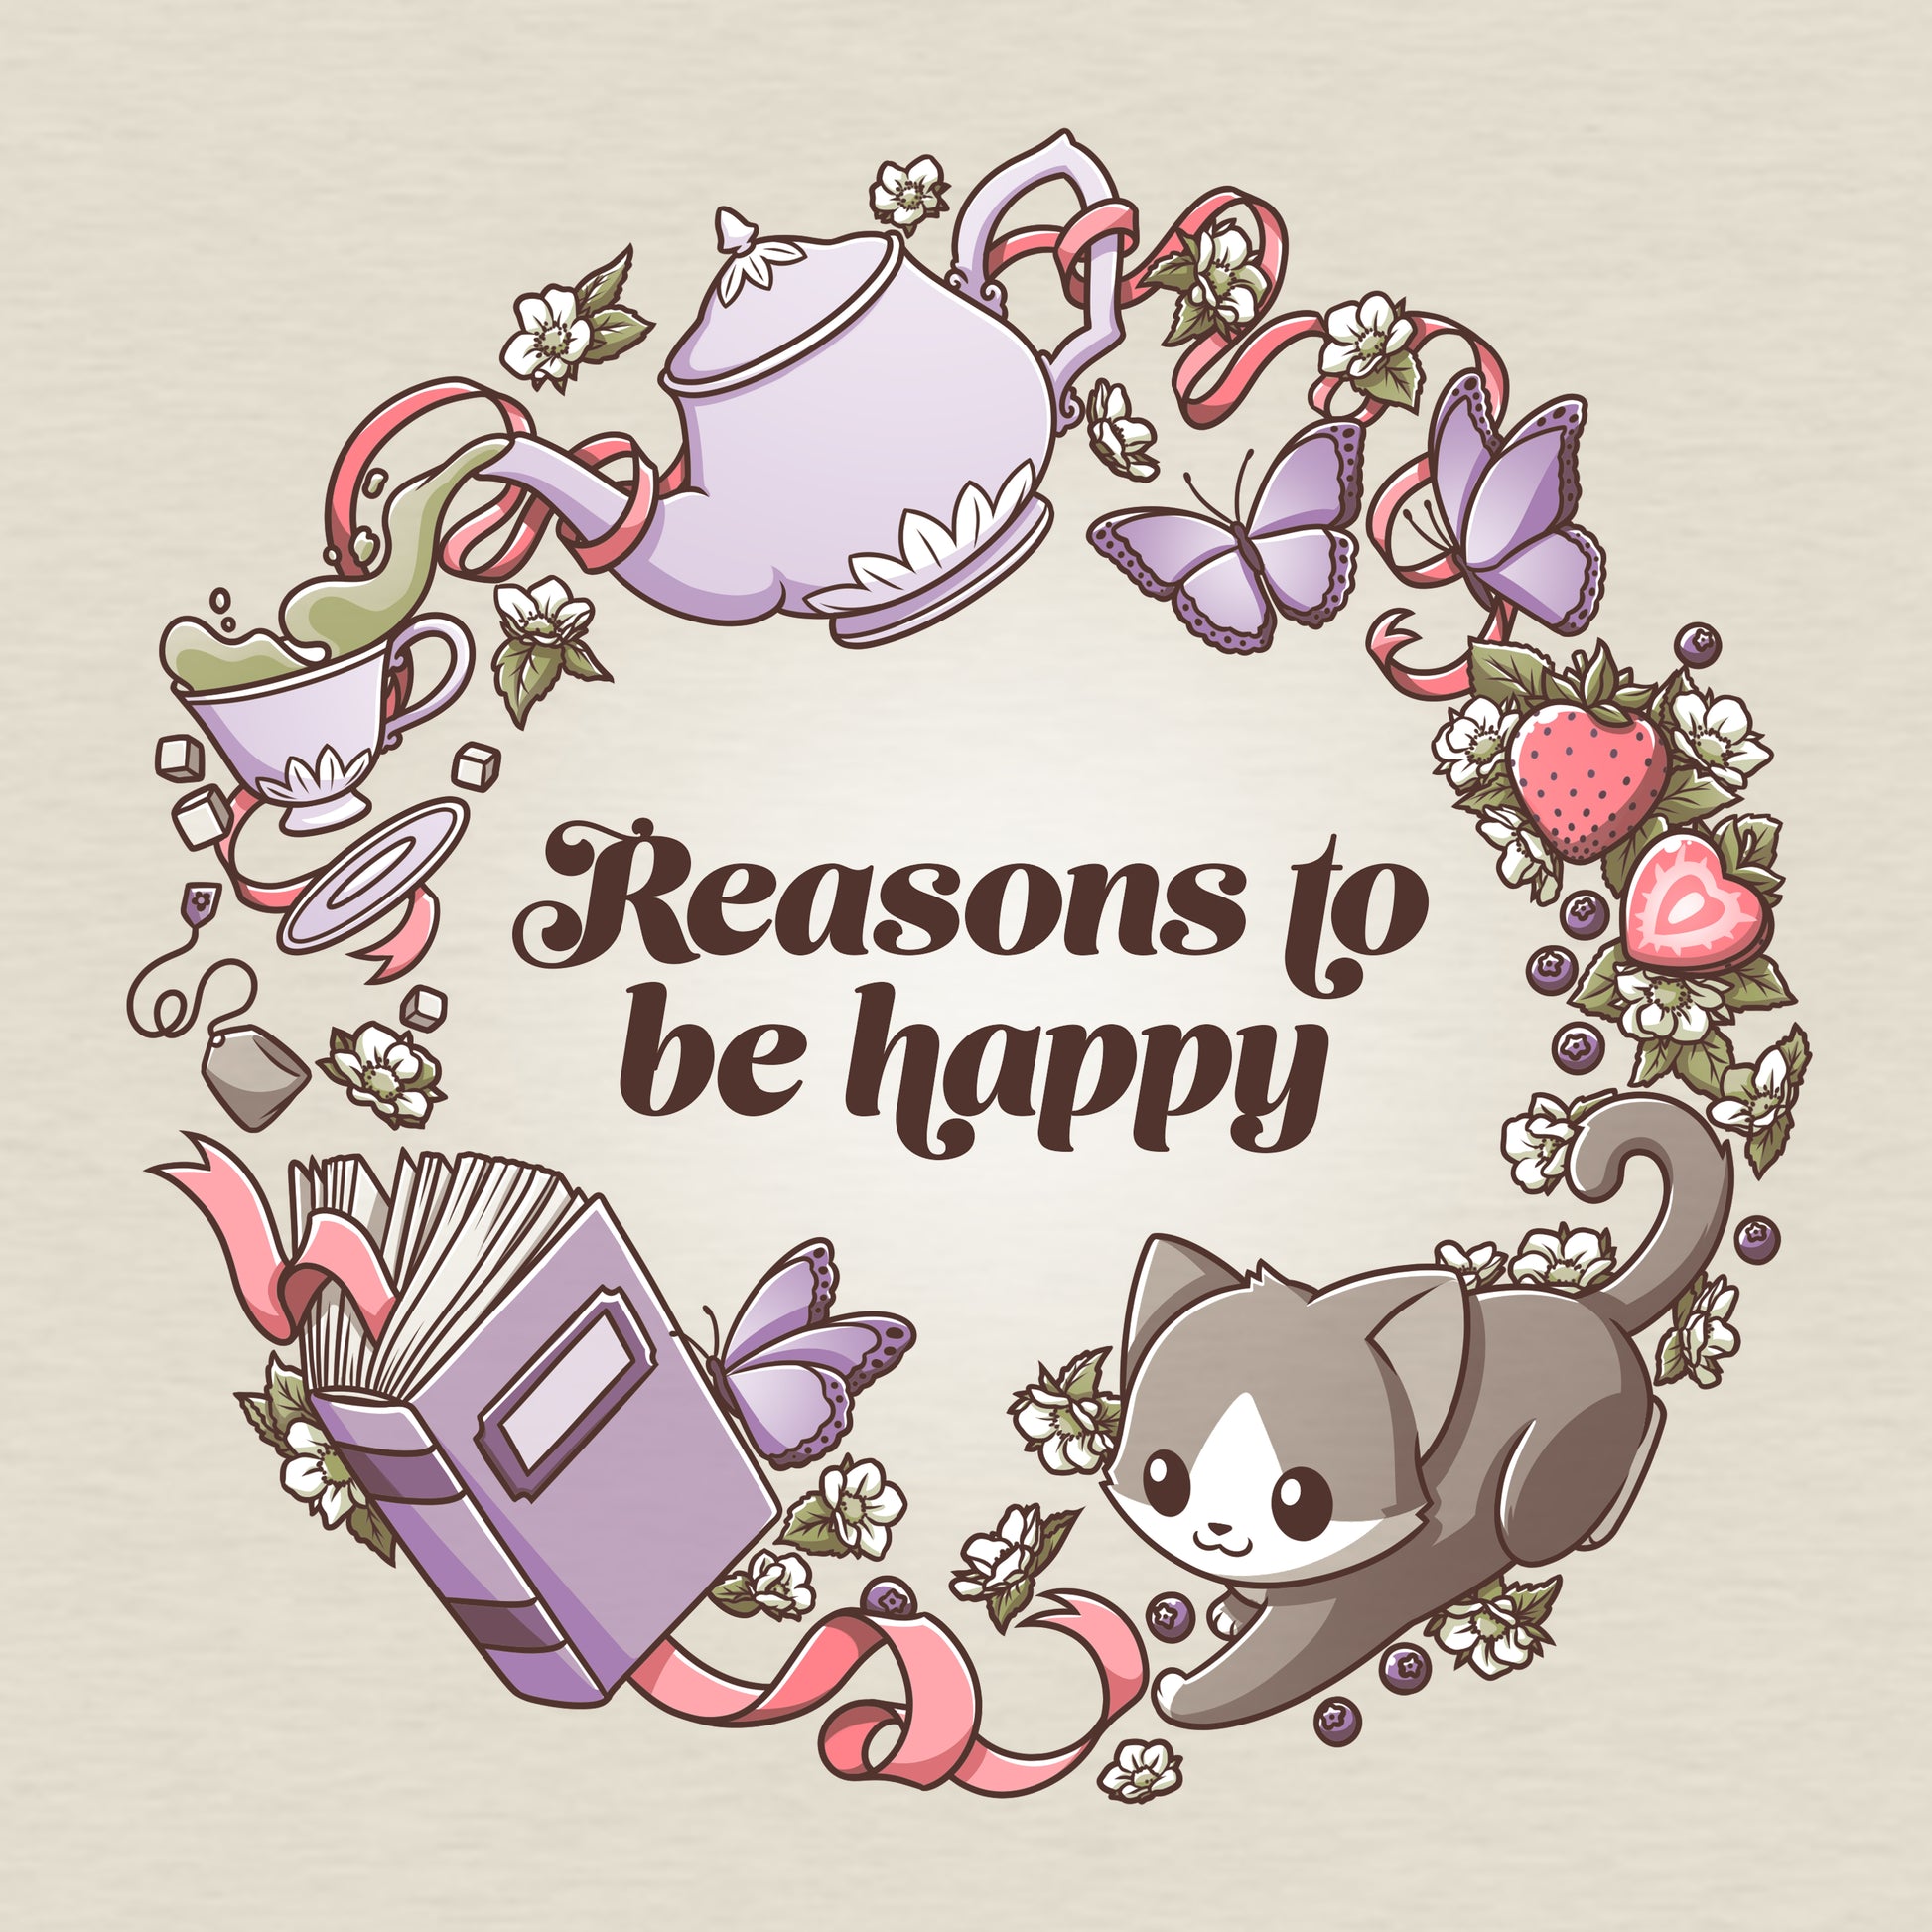 Reasons to be happy while wearing a comfy TeeTurtle T-shirt in a cottagecore setting.